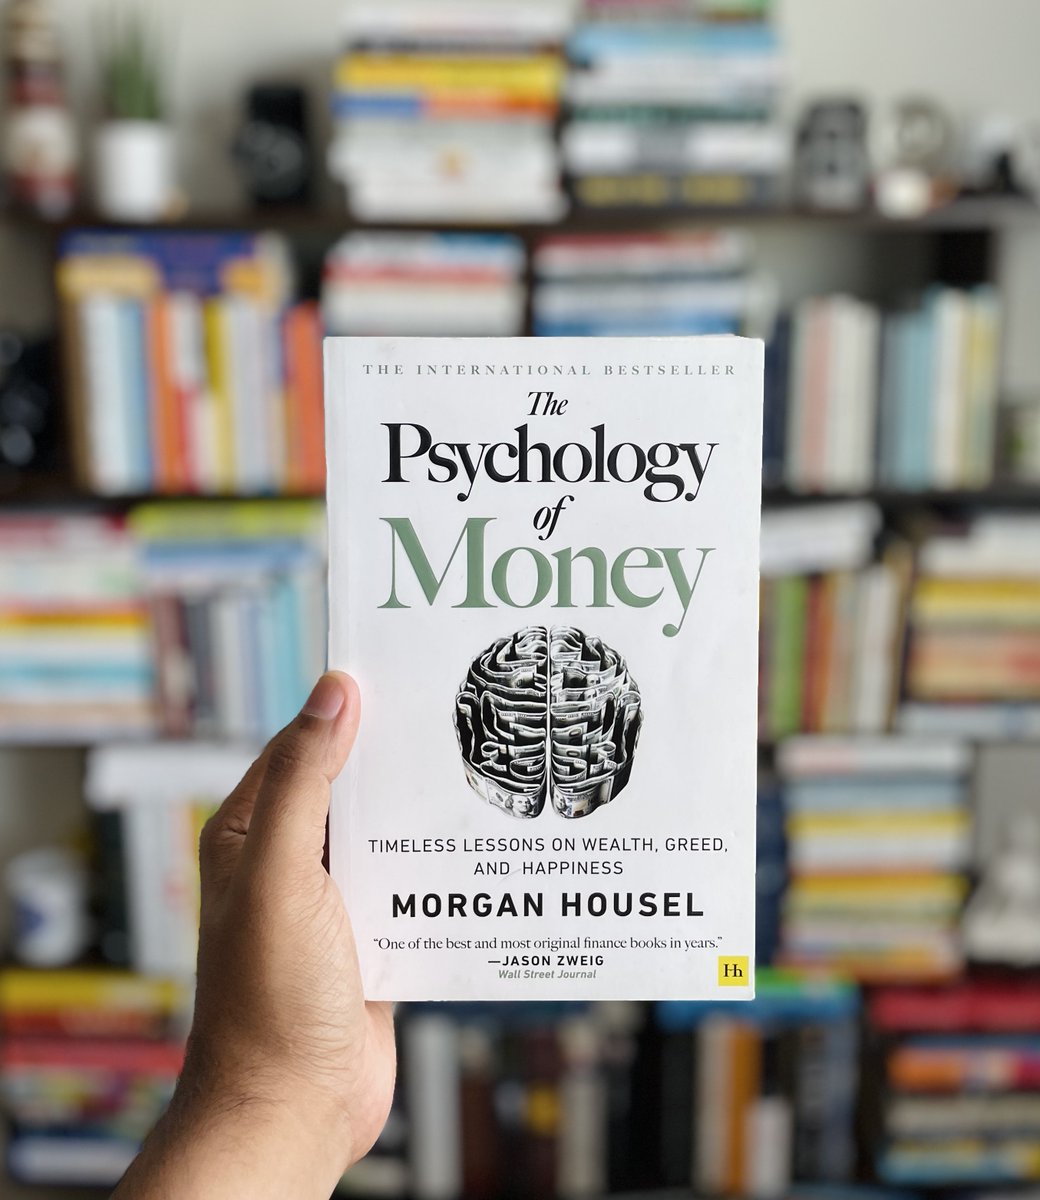 7 Books That Will Change The Way You Think About Money: 1) The Psychology of Money by Morgan Housel Morgan Housel has described the different perspectives on how we think about money with unmatched simplicity. Everyone should own a copy of this book.